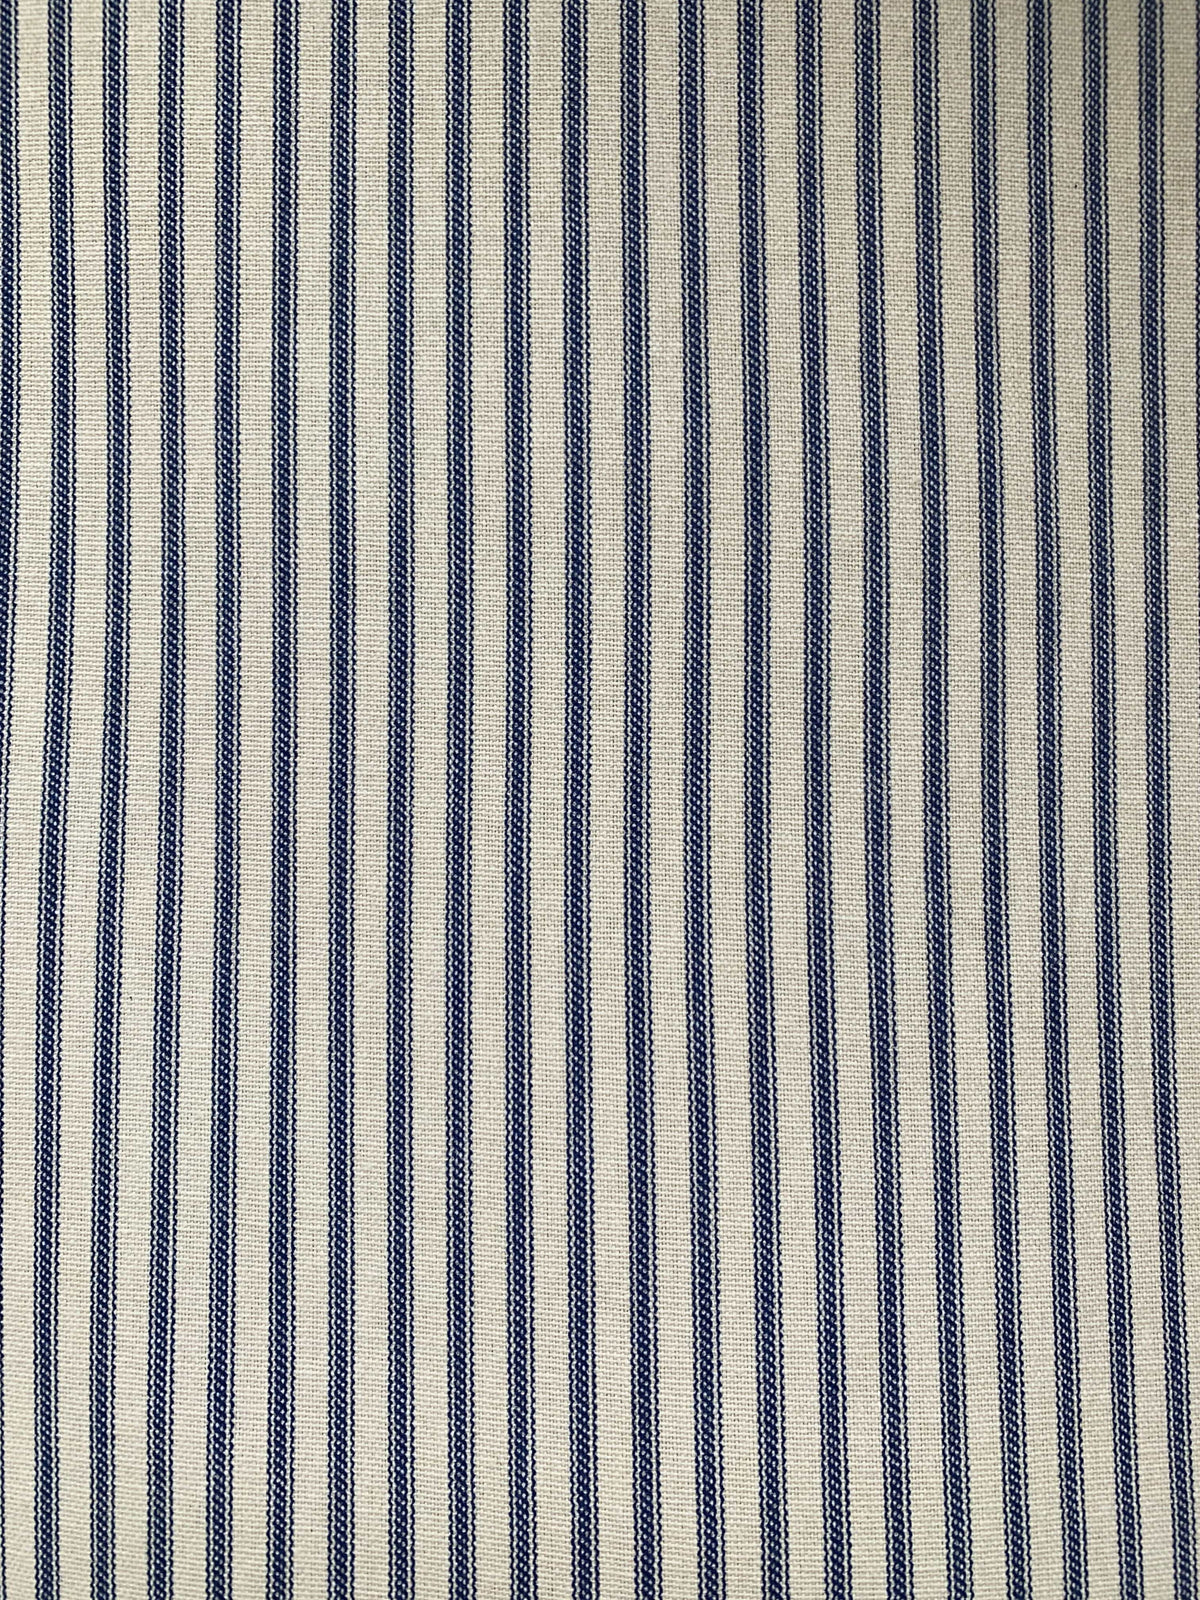 A classic blue and white striped ticking.